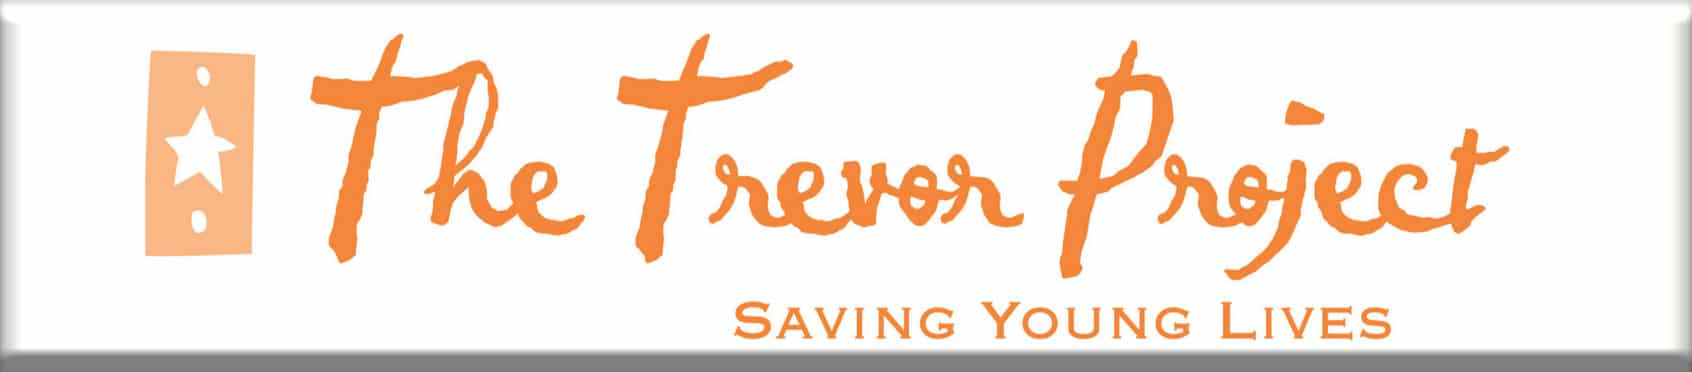 The Trevor Project National help line for LGBT people in need